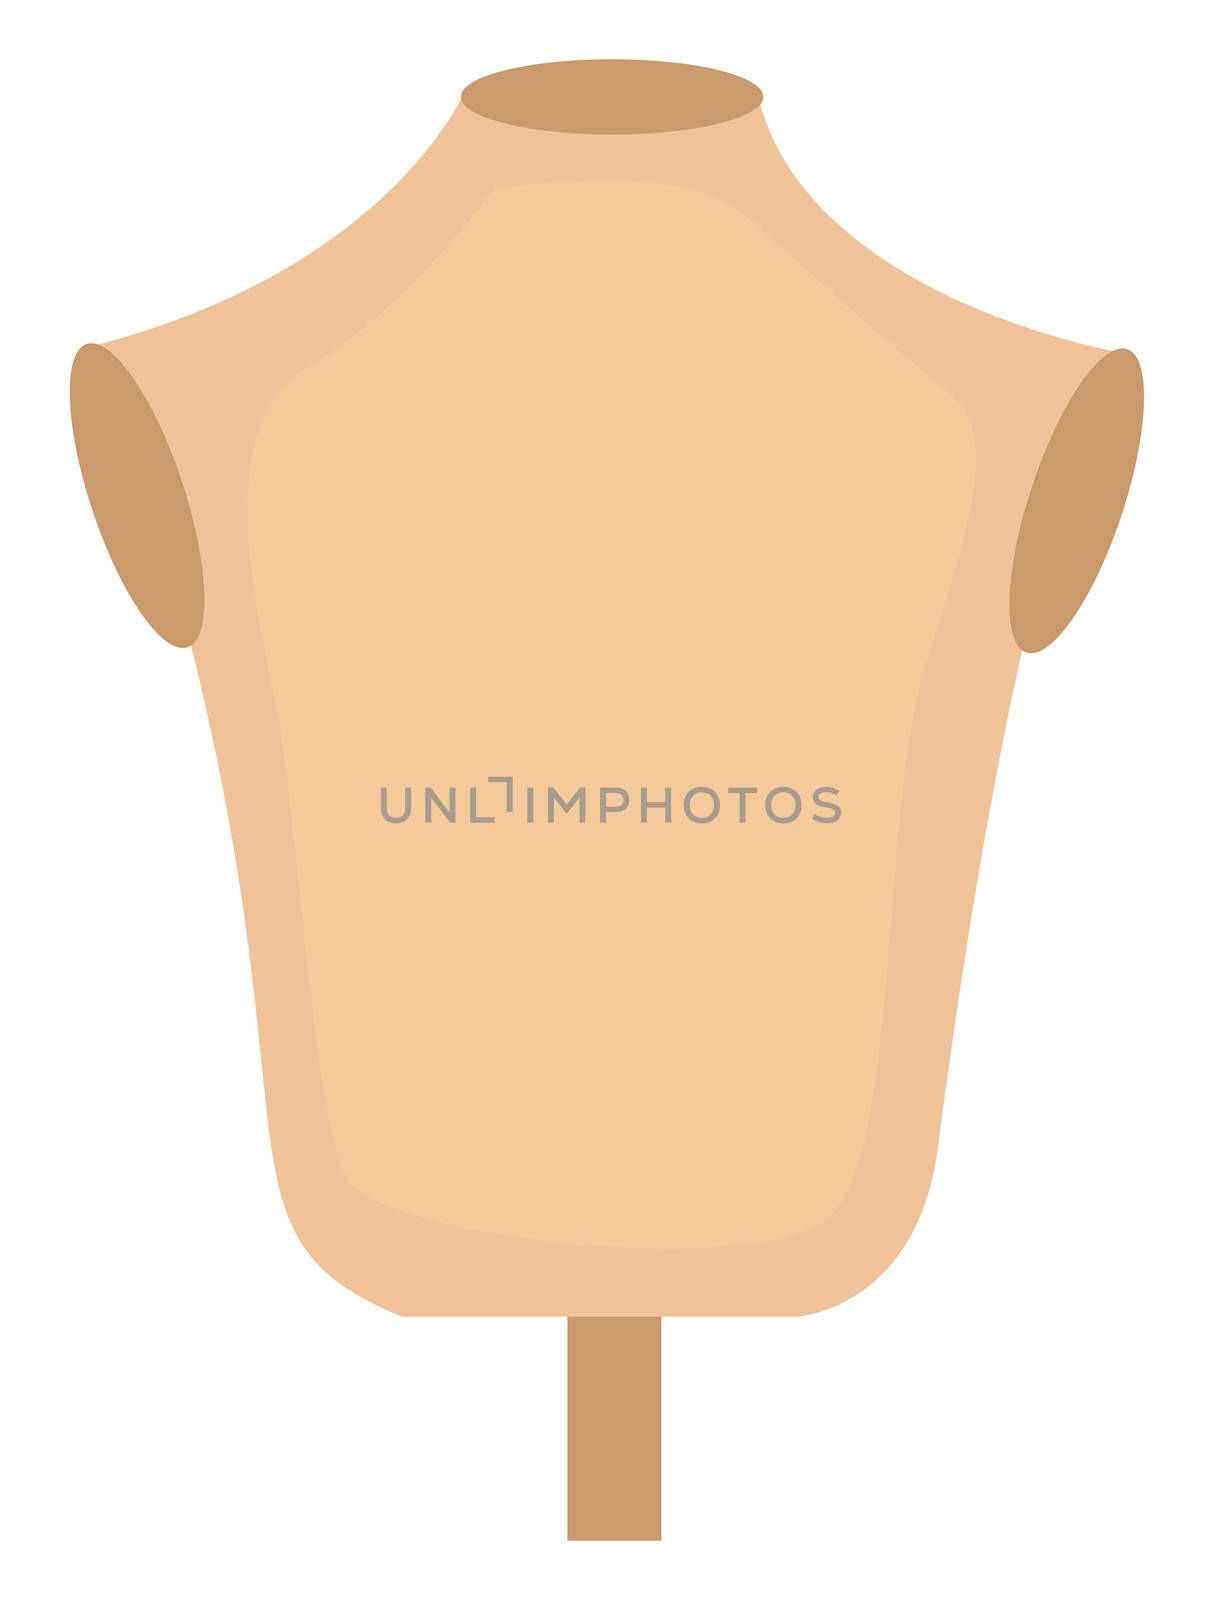 Dummy stand, illustration, vector on white background by Morphart